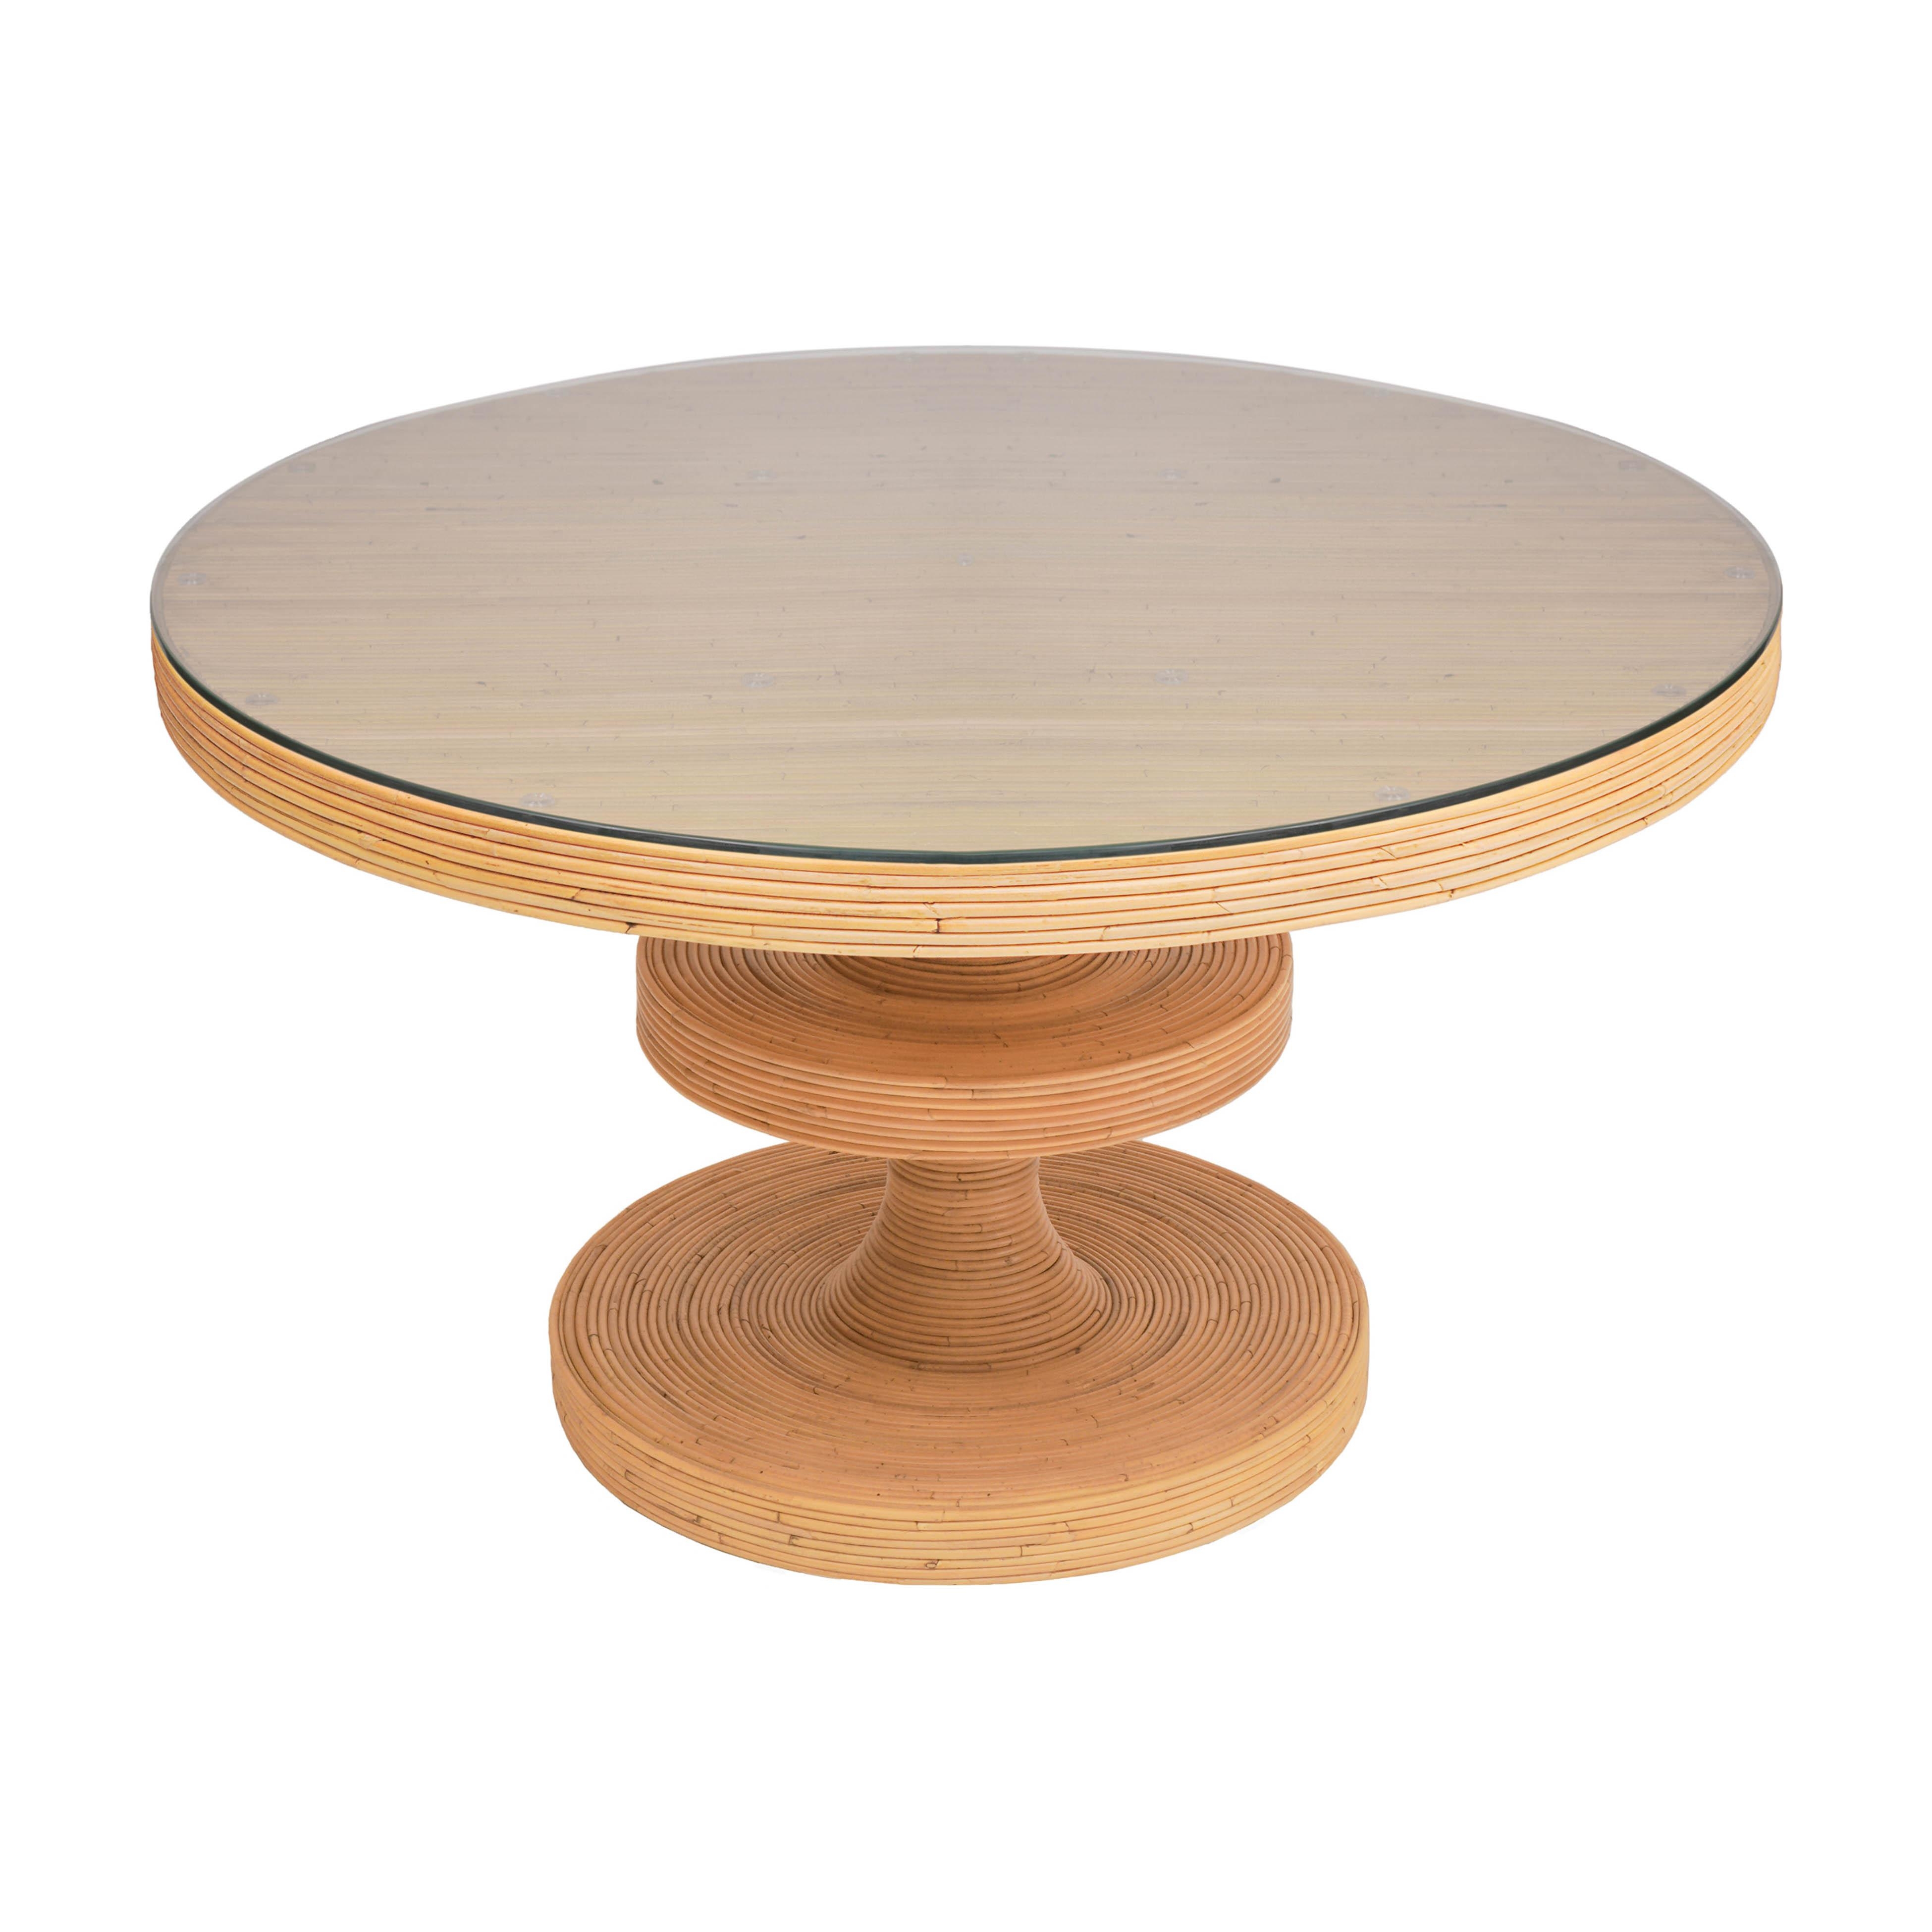 Apollonia Natural Rattan Round Dining Table - Image 1